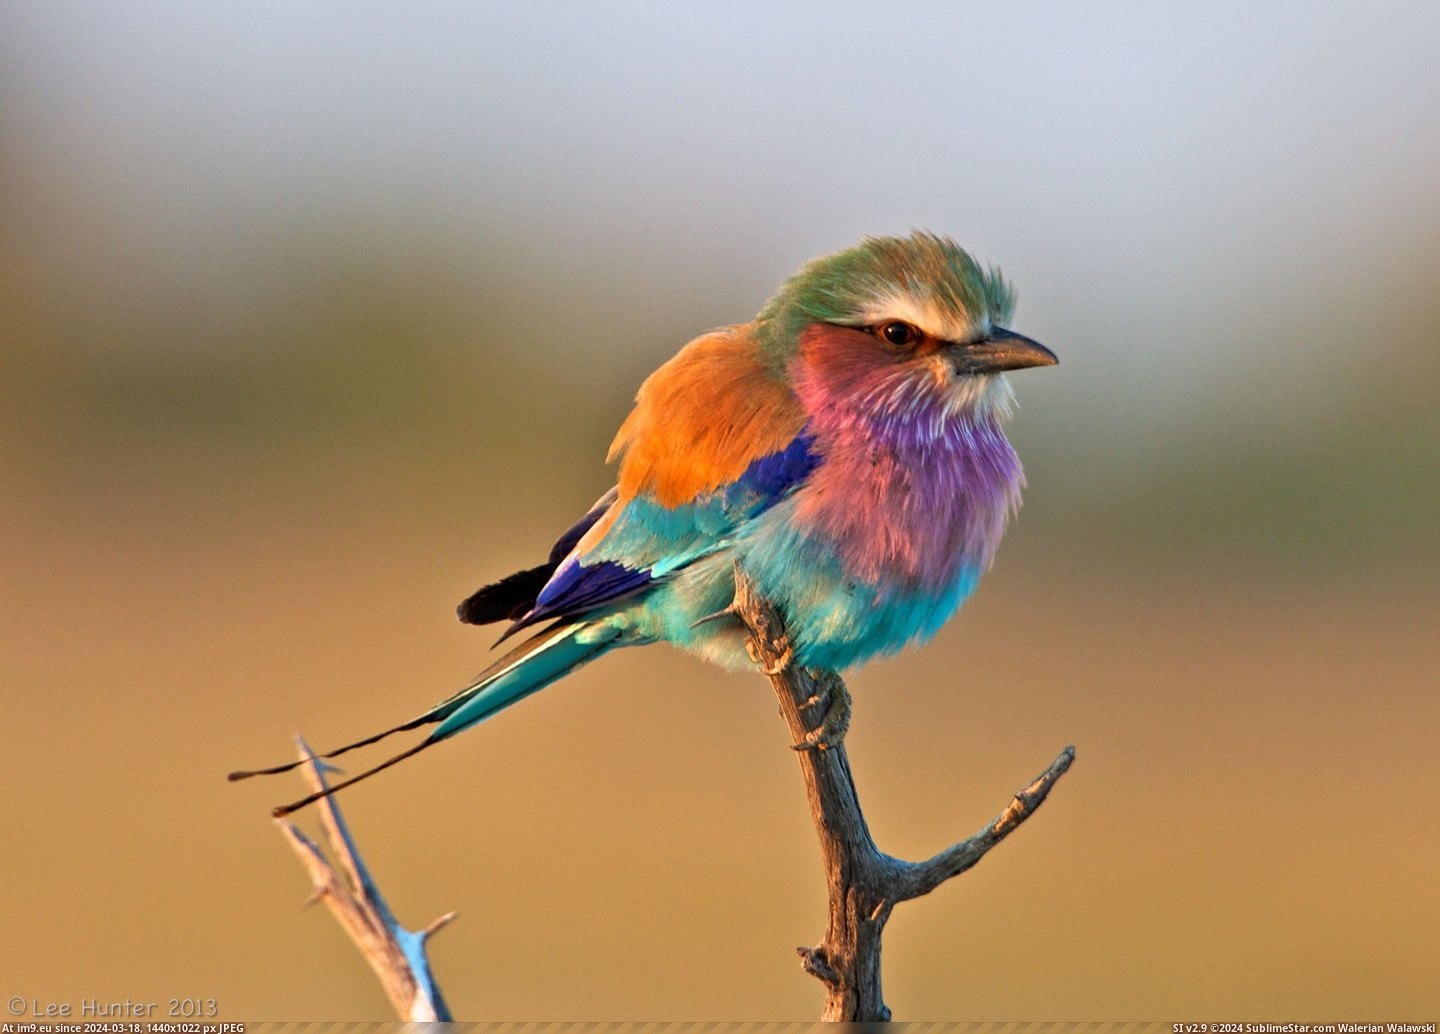 #Cute #Called #Lilac #Roller #Breasted [Pics] Cute little thing called the lilac-breasted roller. Pic. (Изображение из альбом My r/PICS favs))